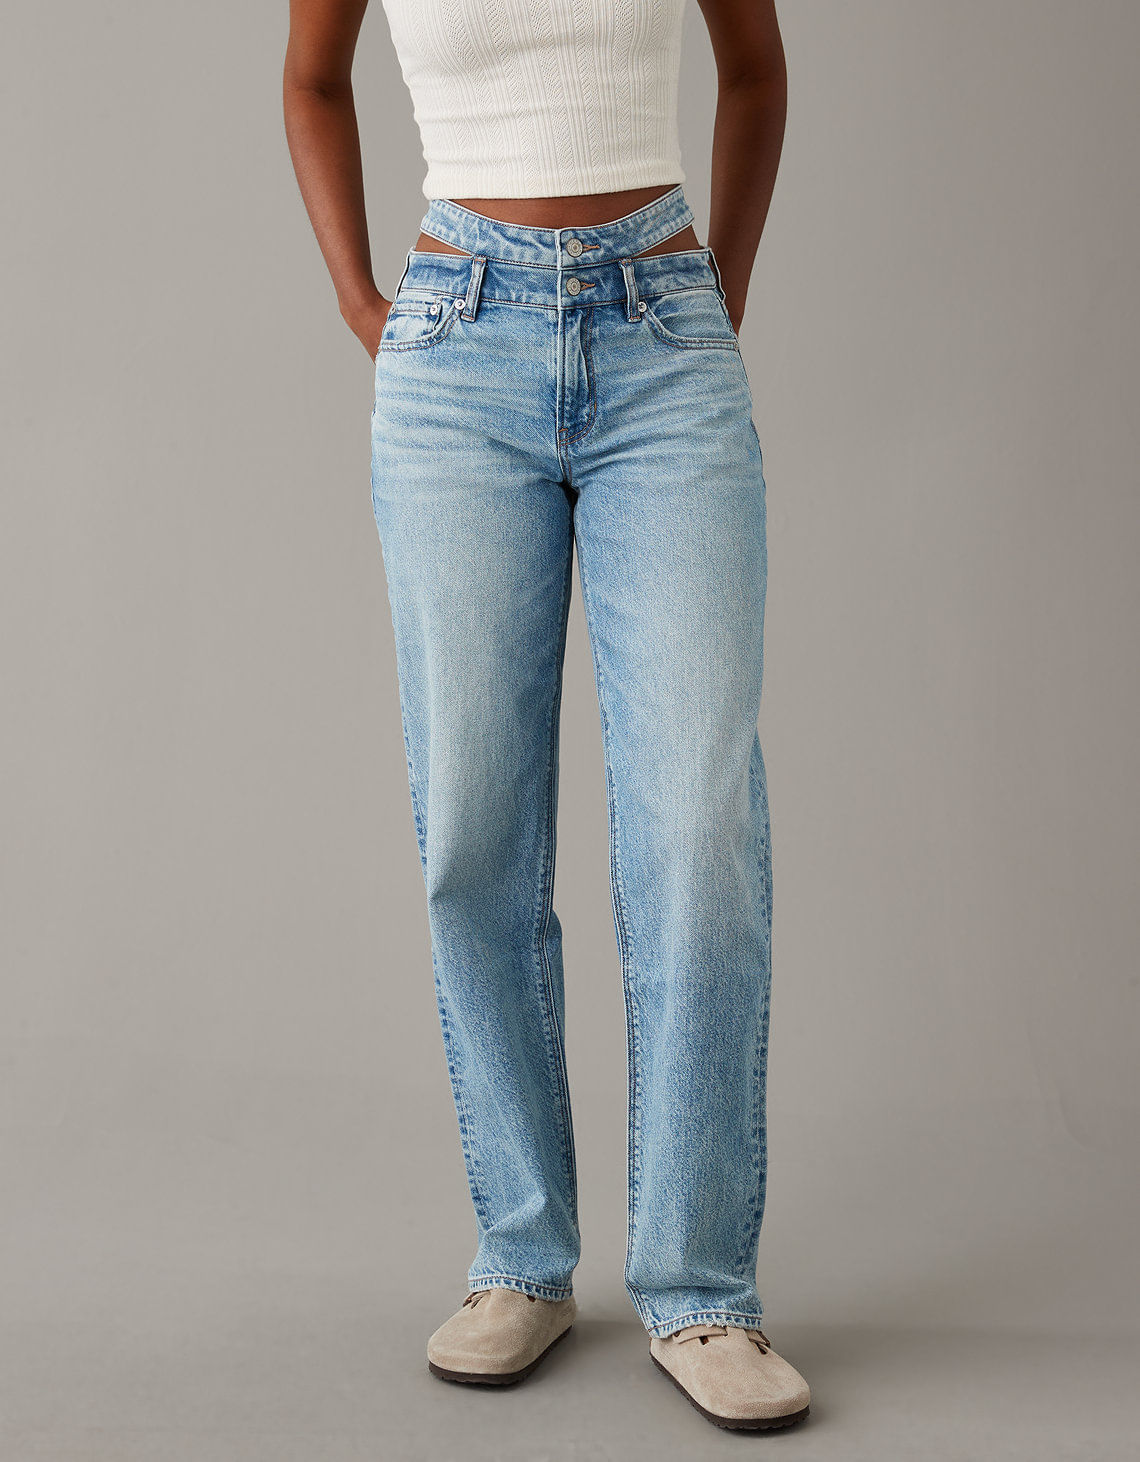 Relaxed Fit, Jeans Anchos para Mujer